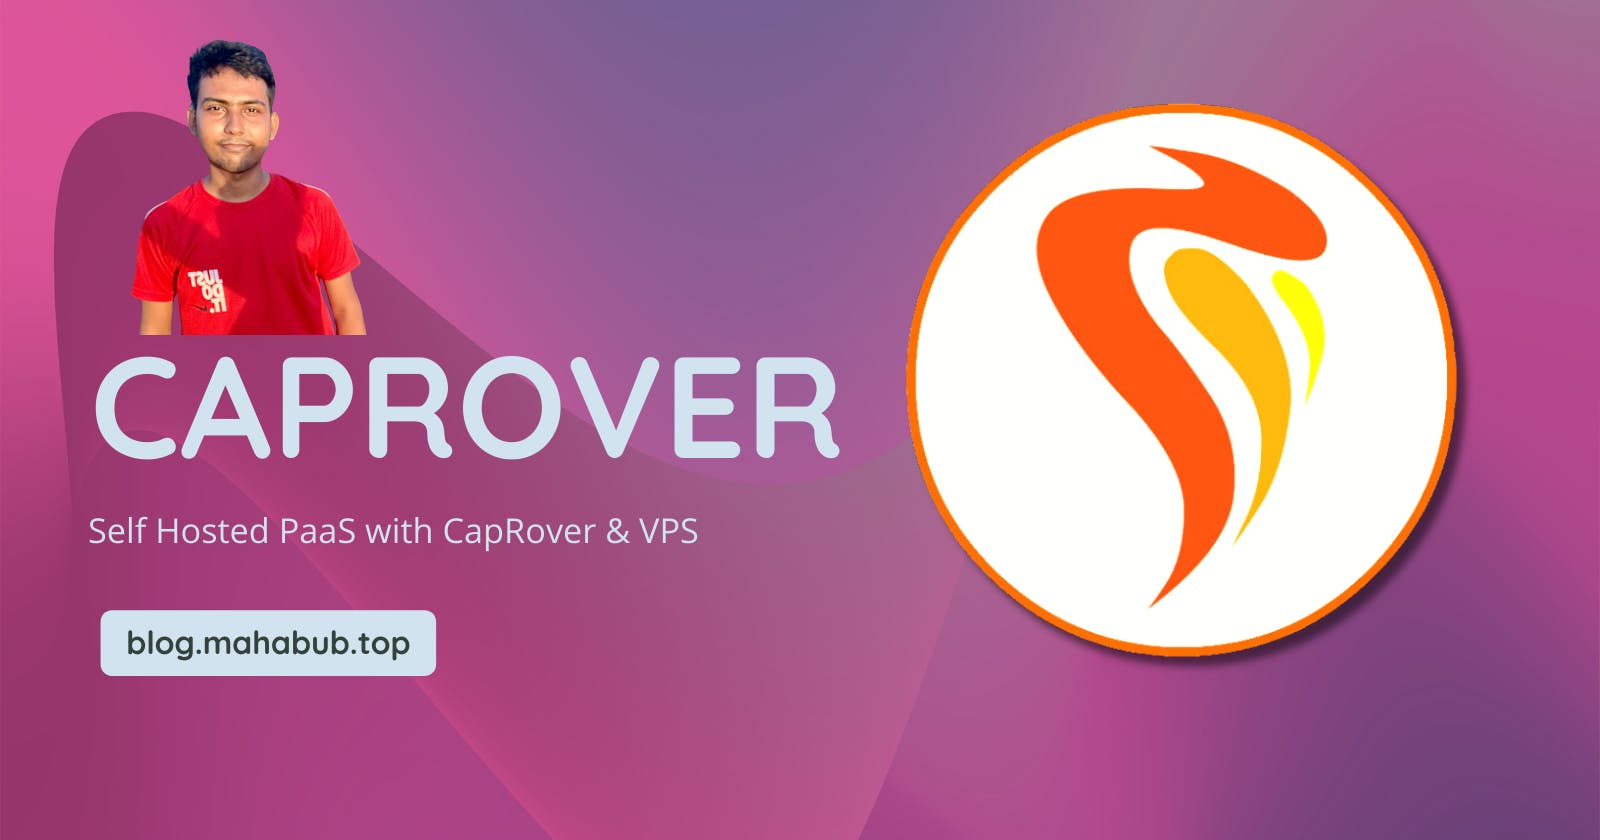 Make your own PaaS with CapRover